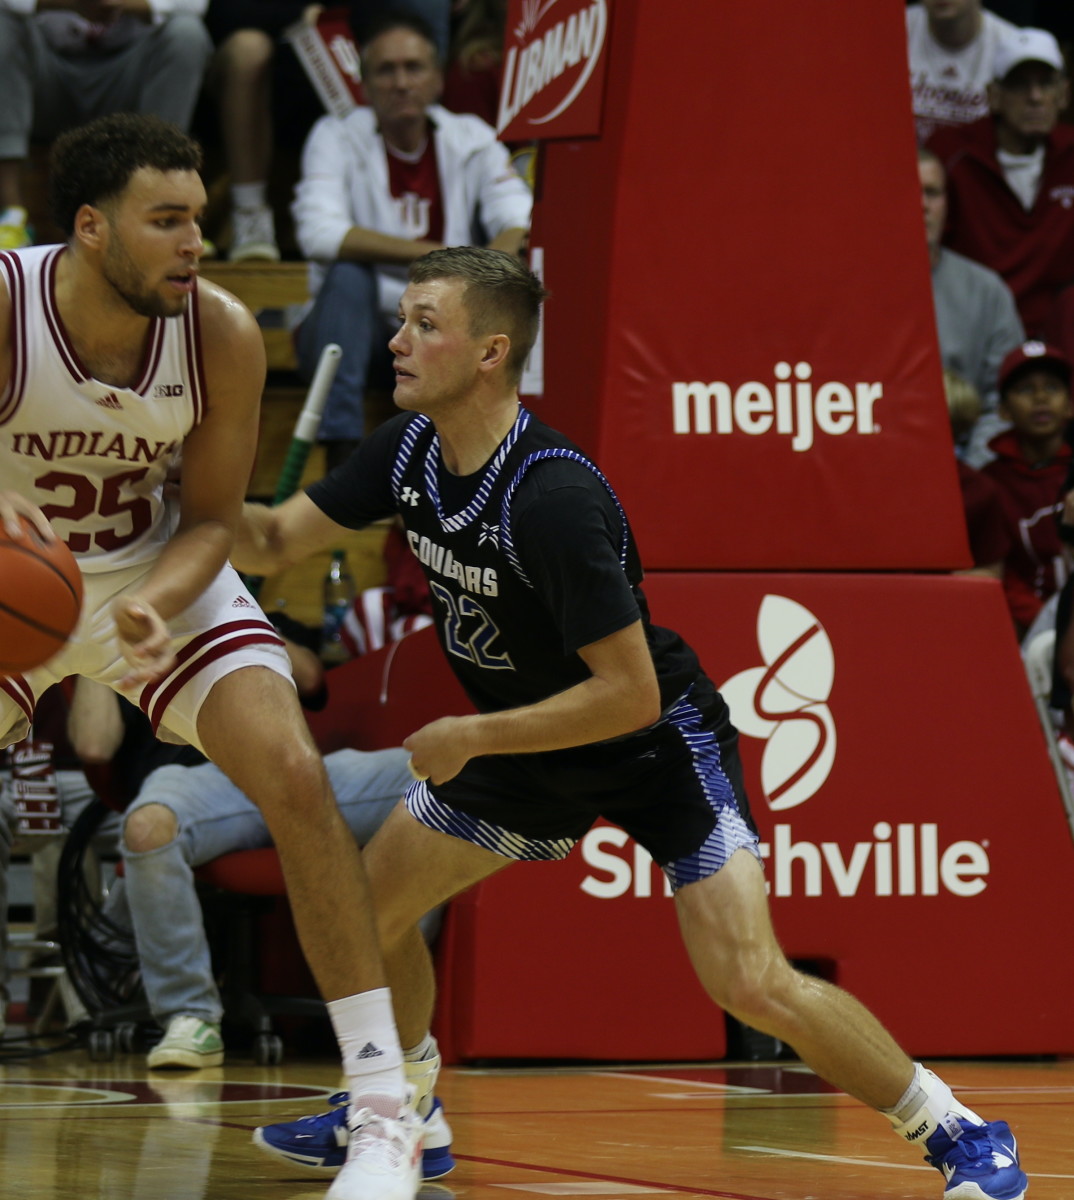 Brayton Bailey (right), the son of former Indiana great Damon Bailey, guards Hoosiers forward Race Thompson during the first half on Thursday. (Photo courtesy of Charlie Mager/Saint Francis)